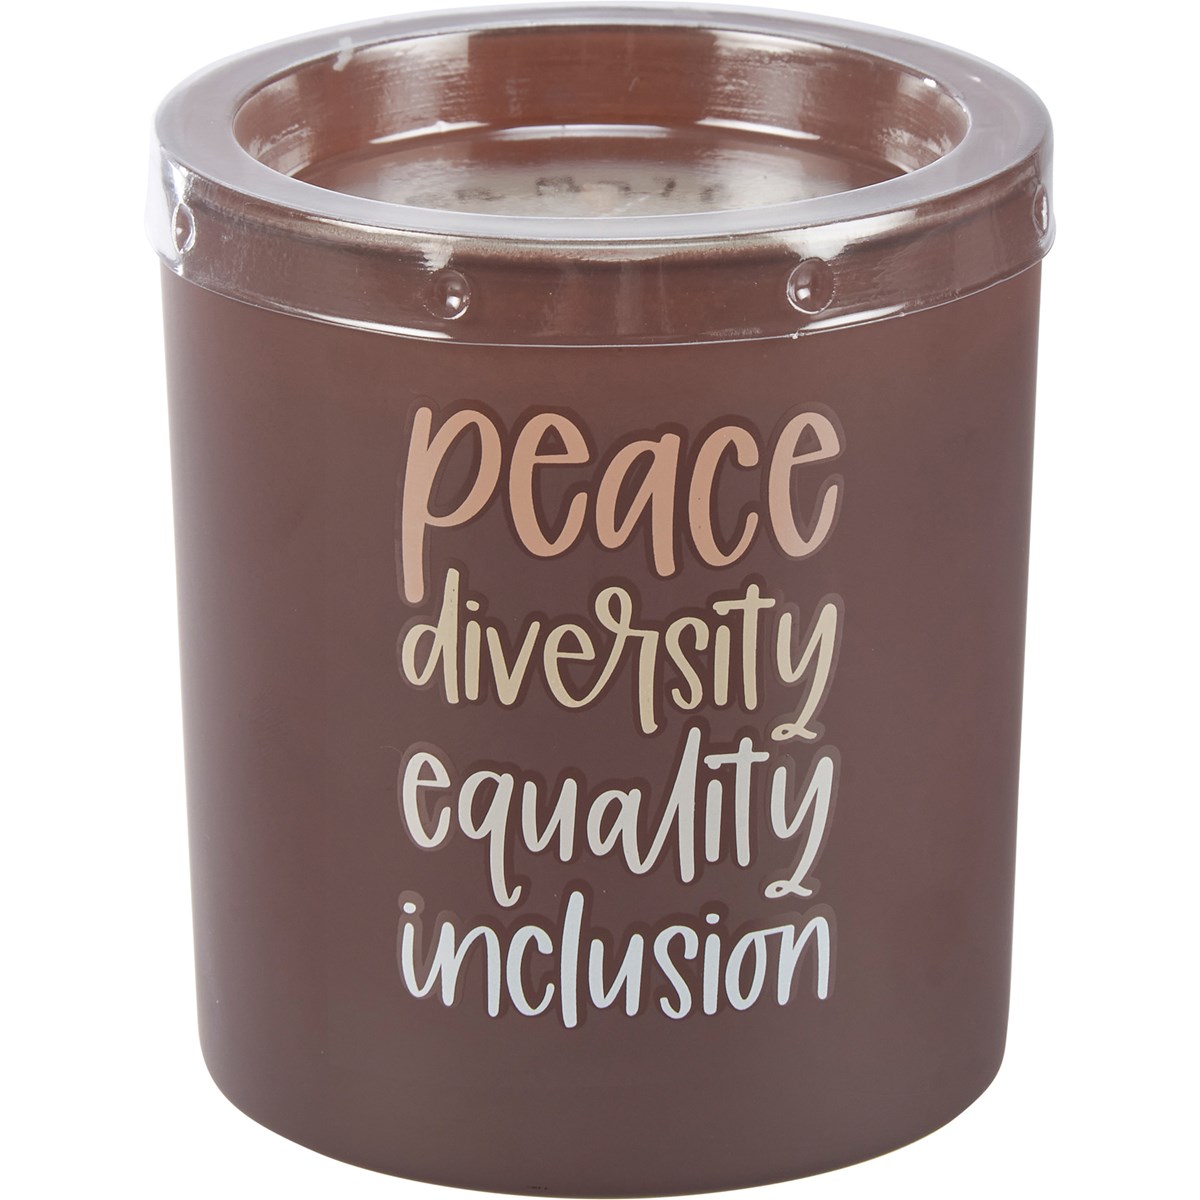 Kindness Peace Diversity Jar Candle - Soy Wax, Glass, Cotton